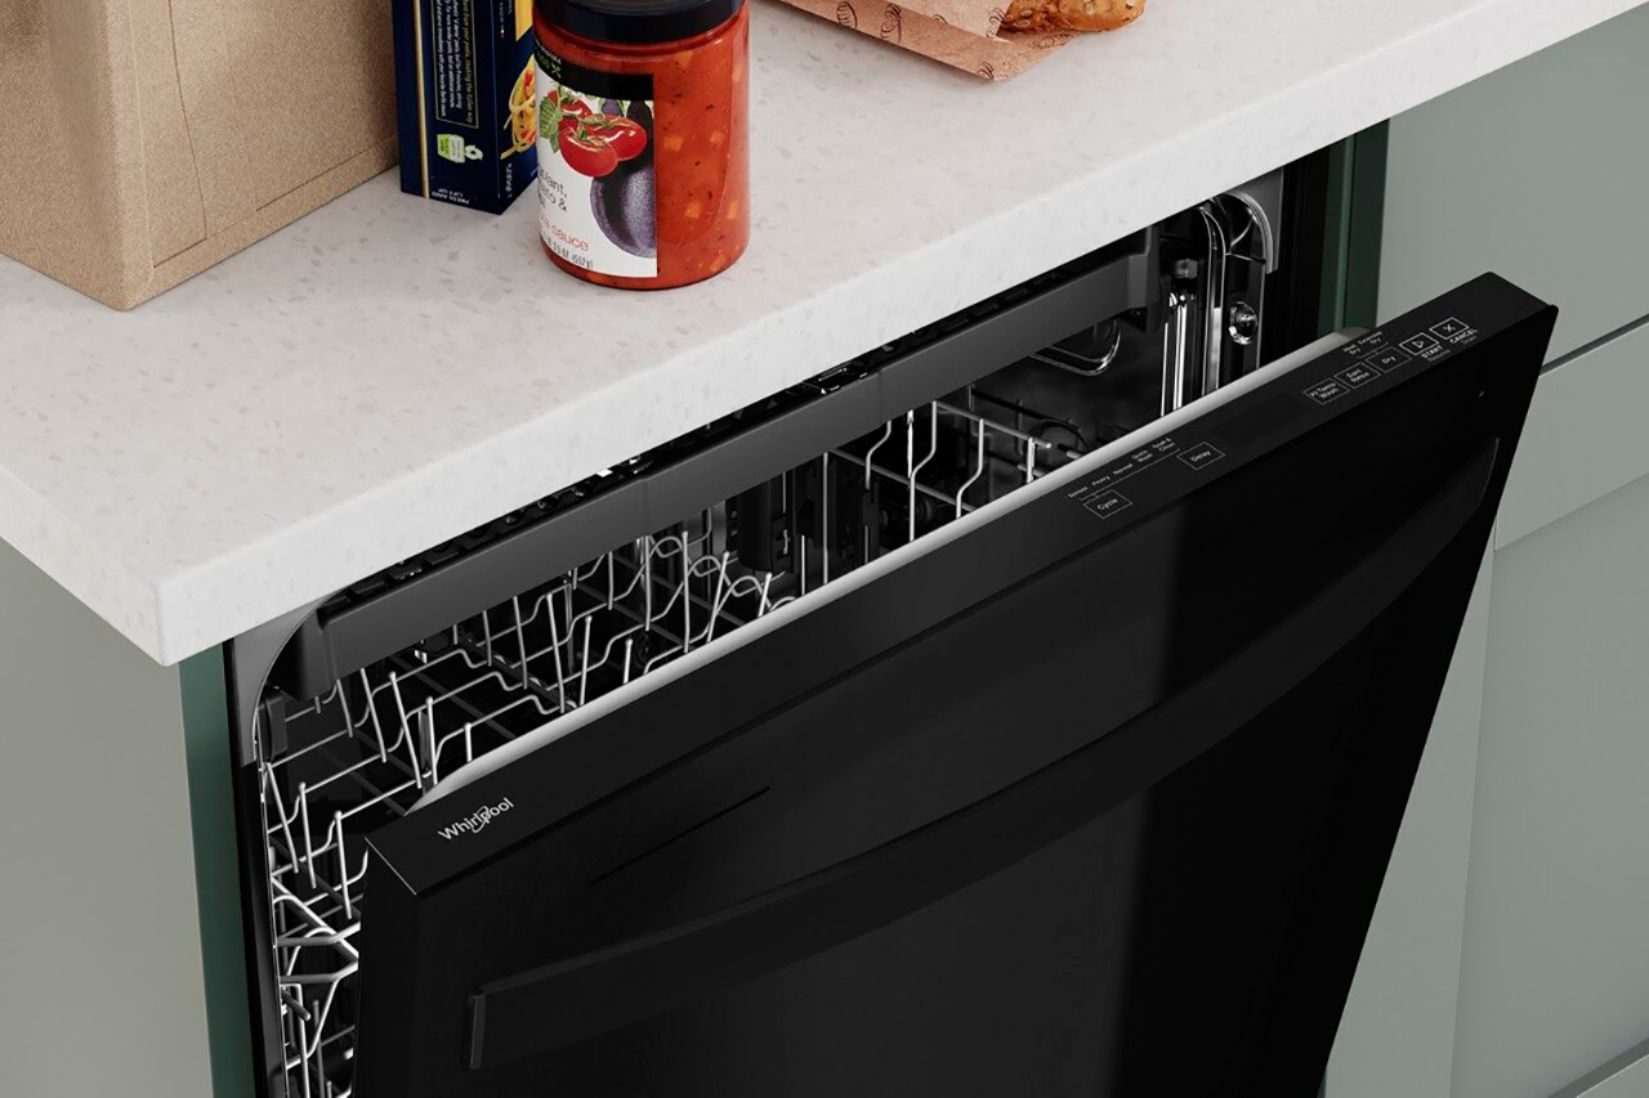 Whirlpool 24" Top Control Built-In Dishwasher with Stainless Steel Tub Dishwasher With Stainless Steel Tub And Racks